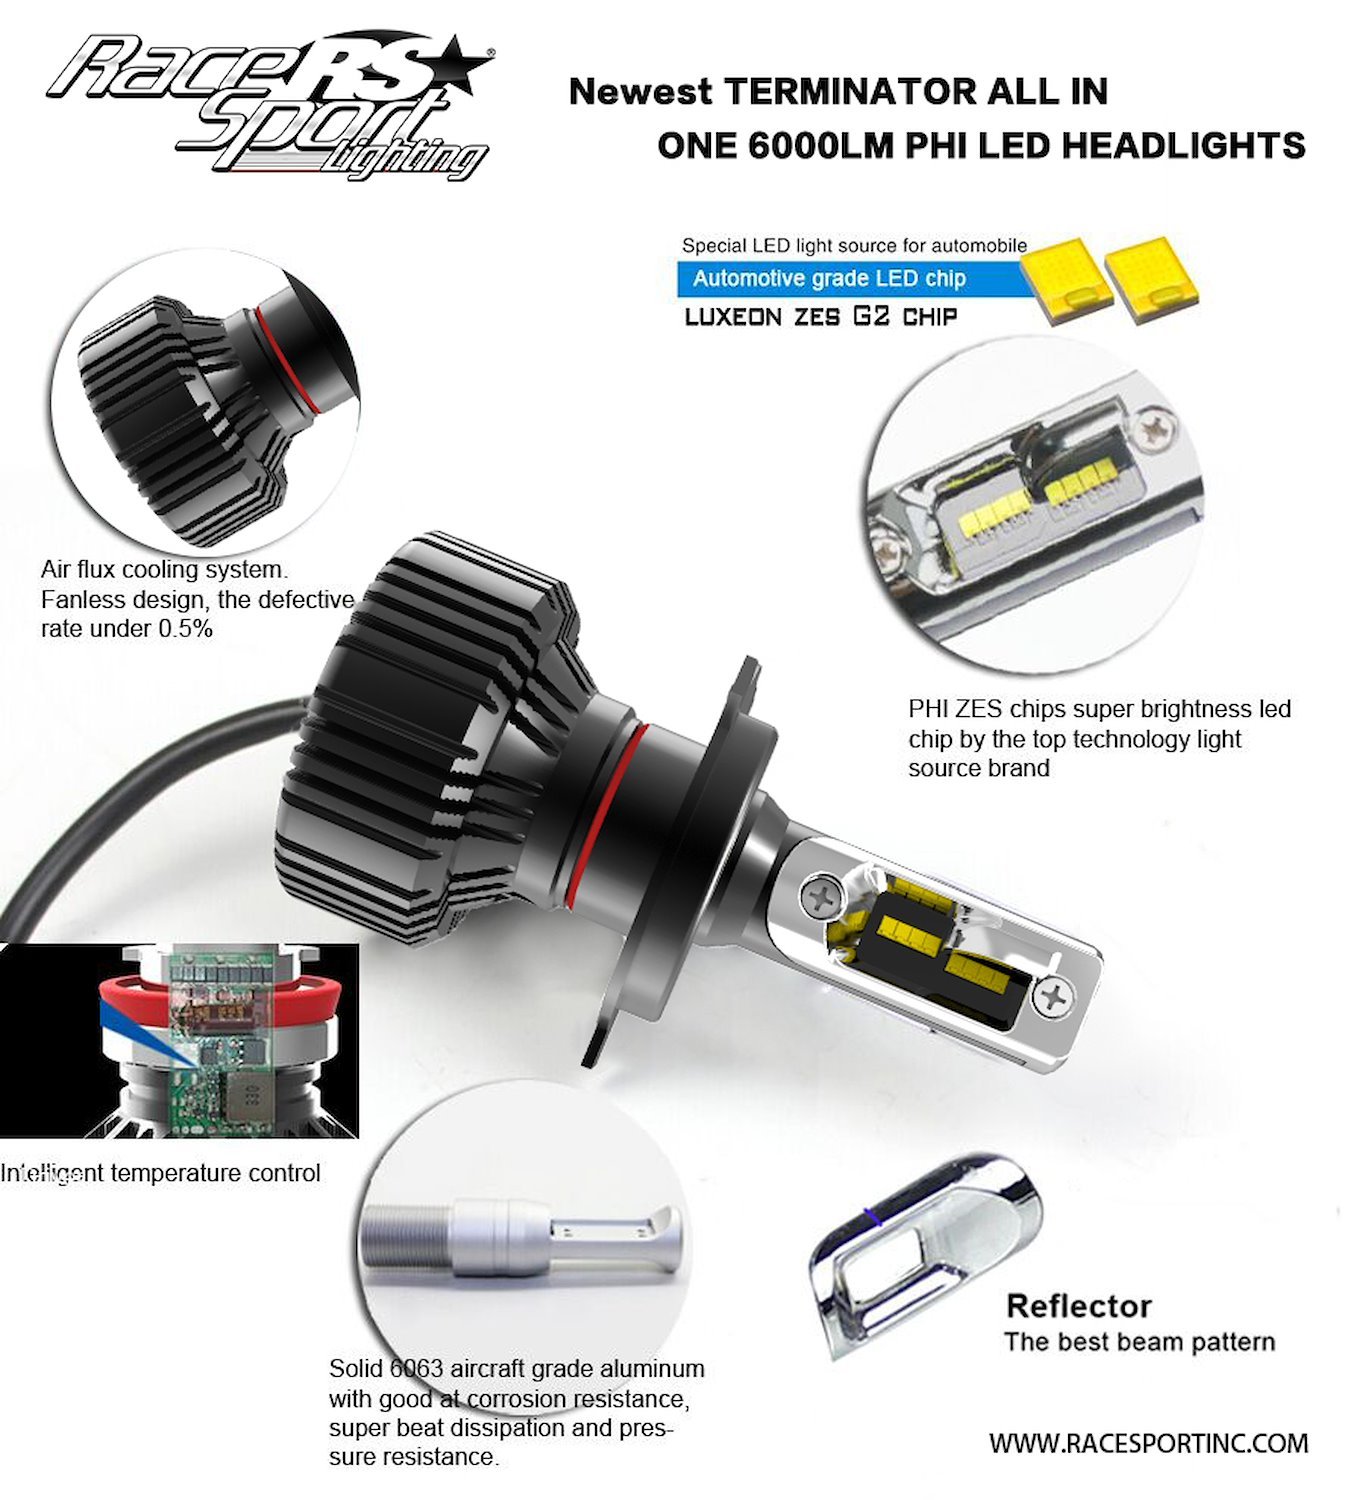 H1TLED Terminator-Series H1 Fan-less LED Conversion HeadLight Kit, w/ Pin Point Projection Optical Aims & Shallow Mount Design